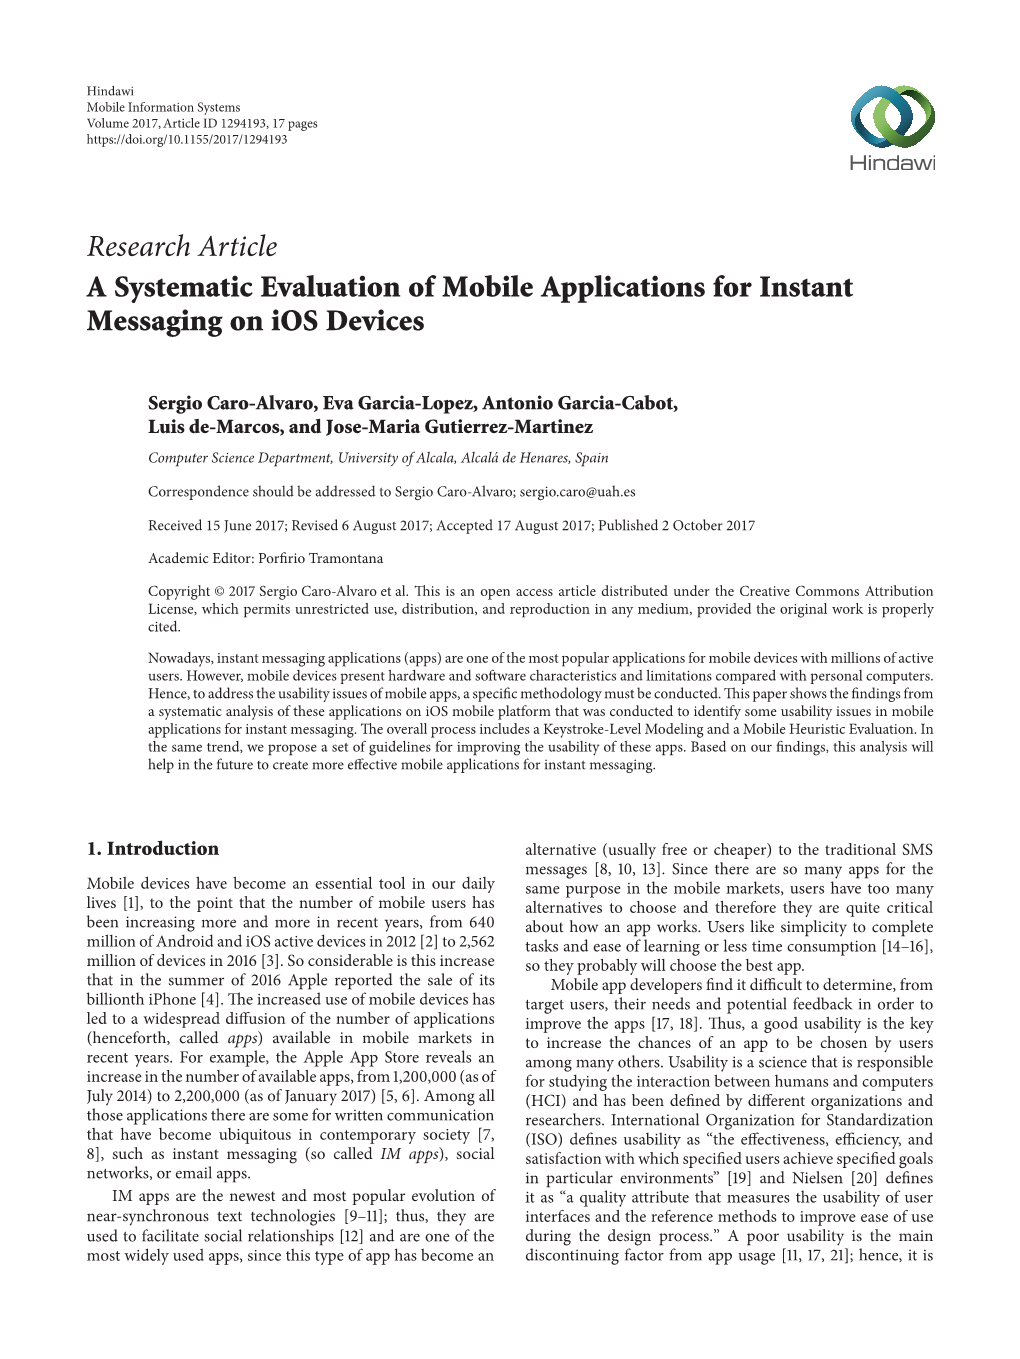 A Systematic Evaluation of Mobile Applications for Instant Messaging on Ios Devices